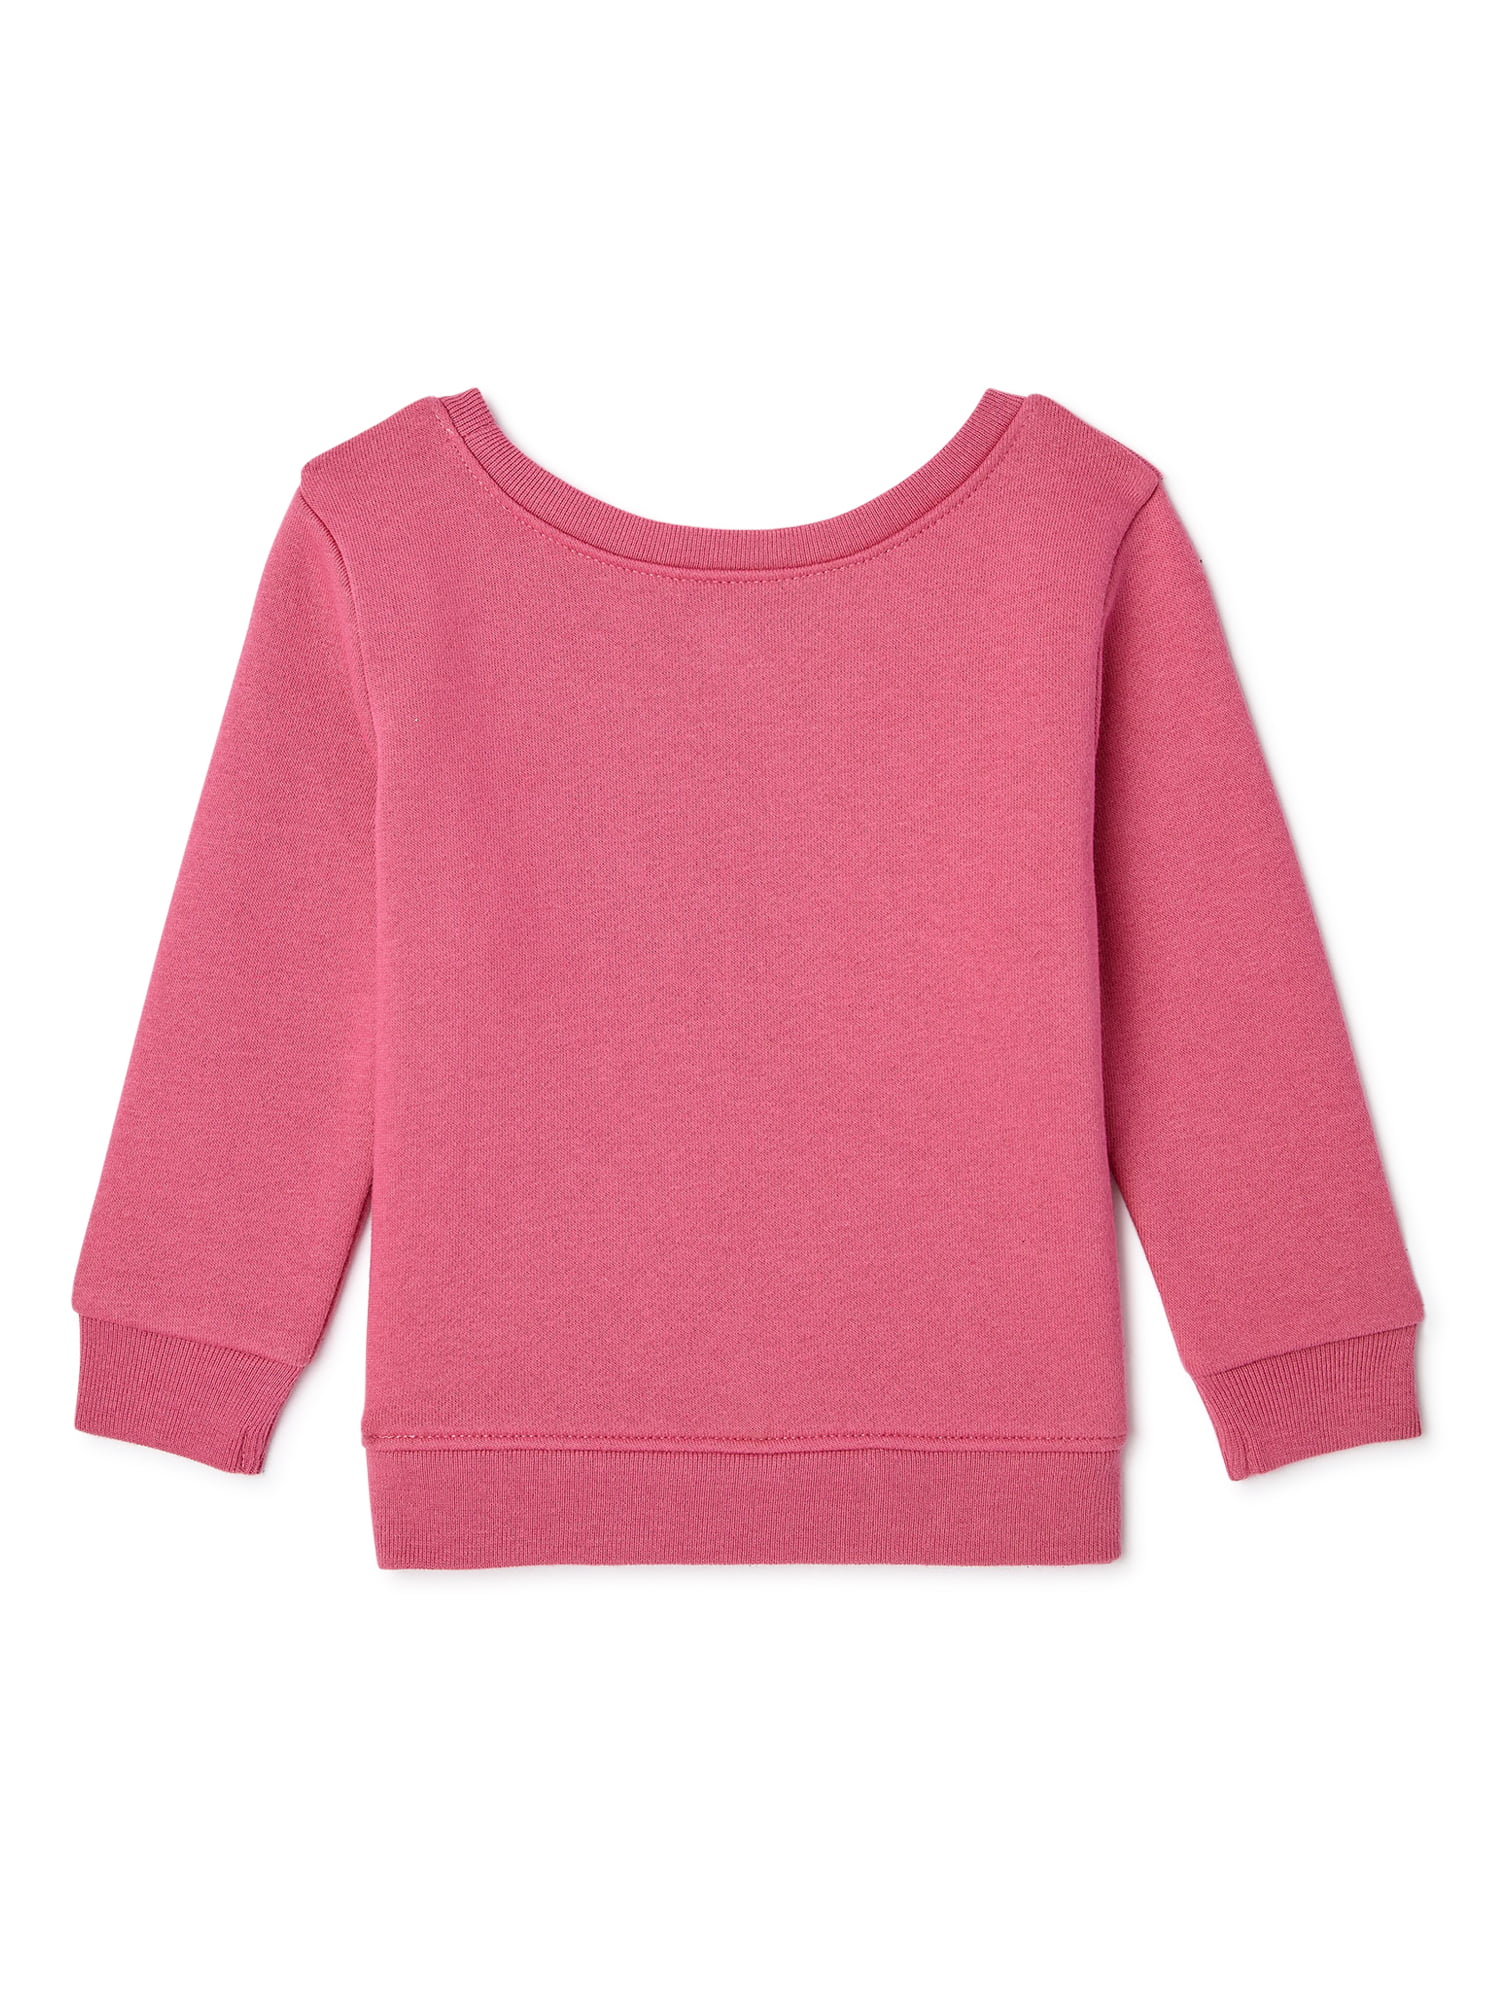 GAP Baby Girls Kitty Cat Crew Knit Sweater Front Back Detail NEW 3 6 12 18 24